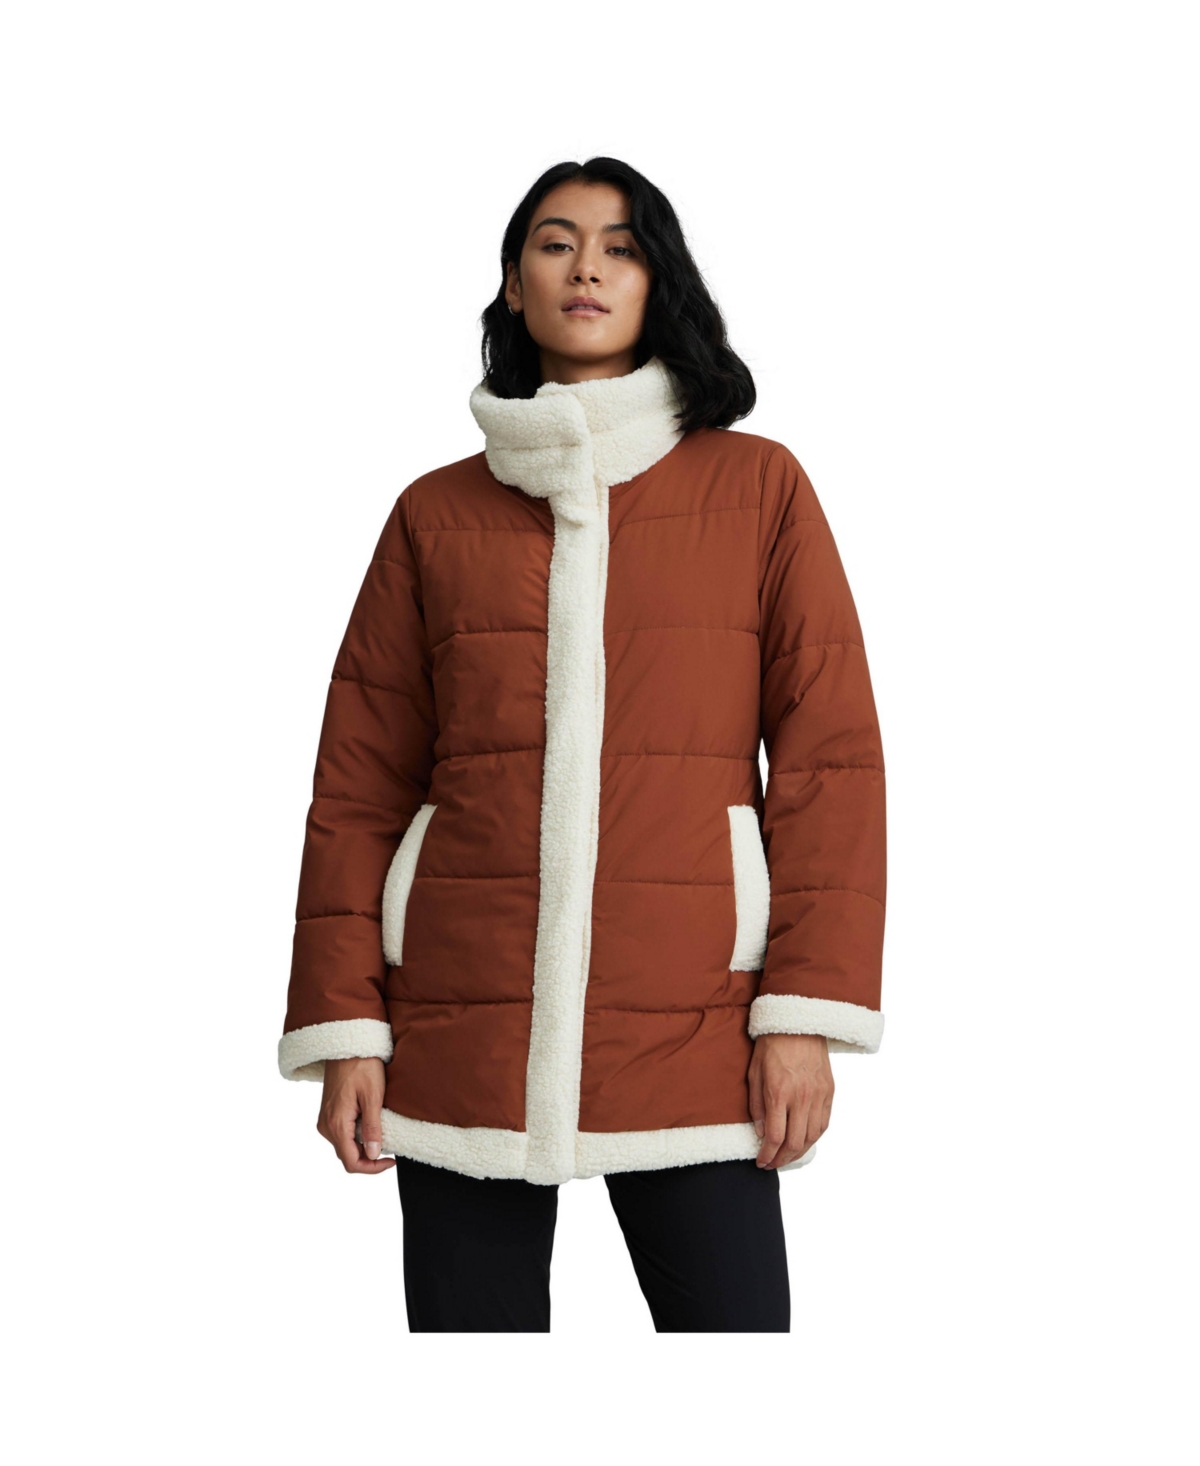 Women's Stretch Poly Mixed Media Puffer Jacket - Stone